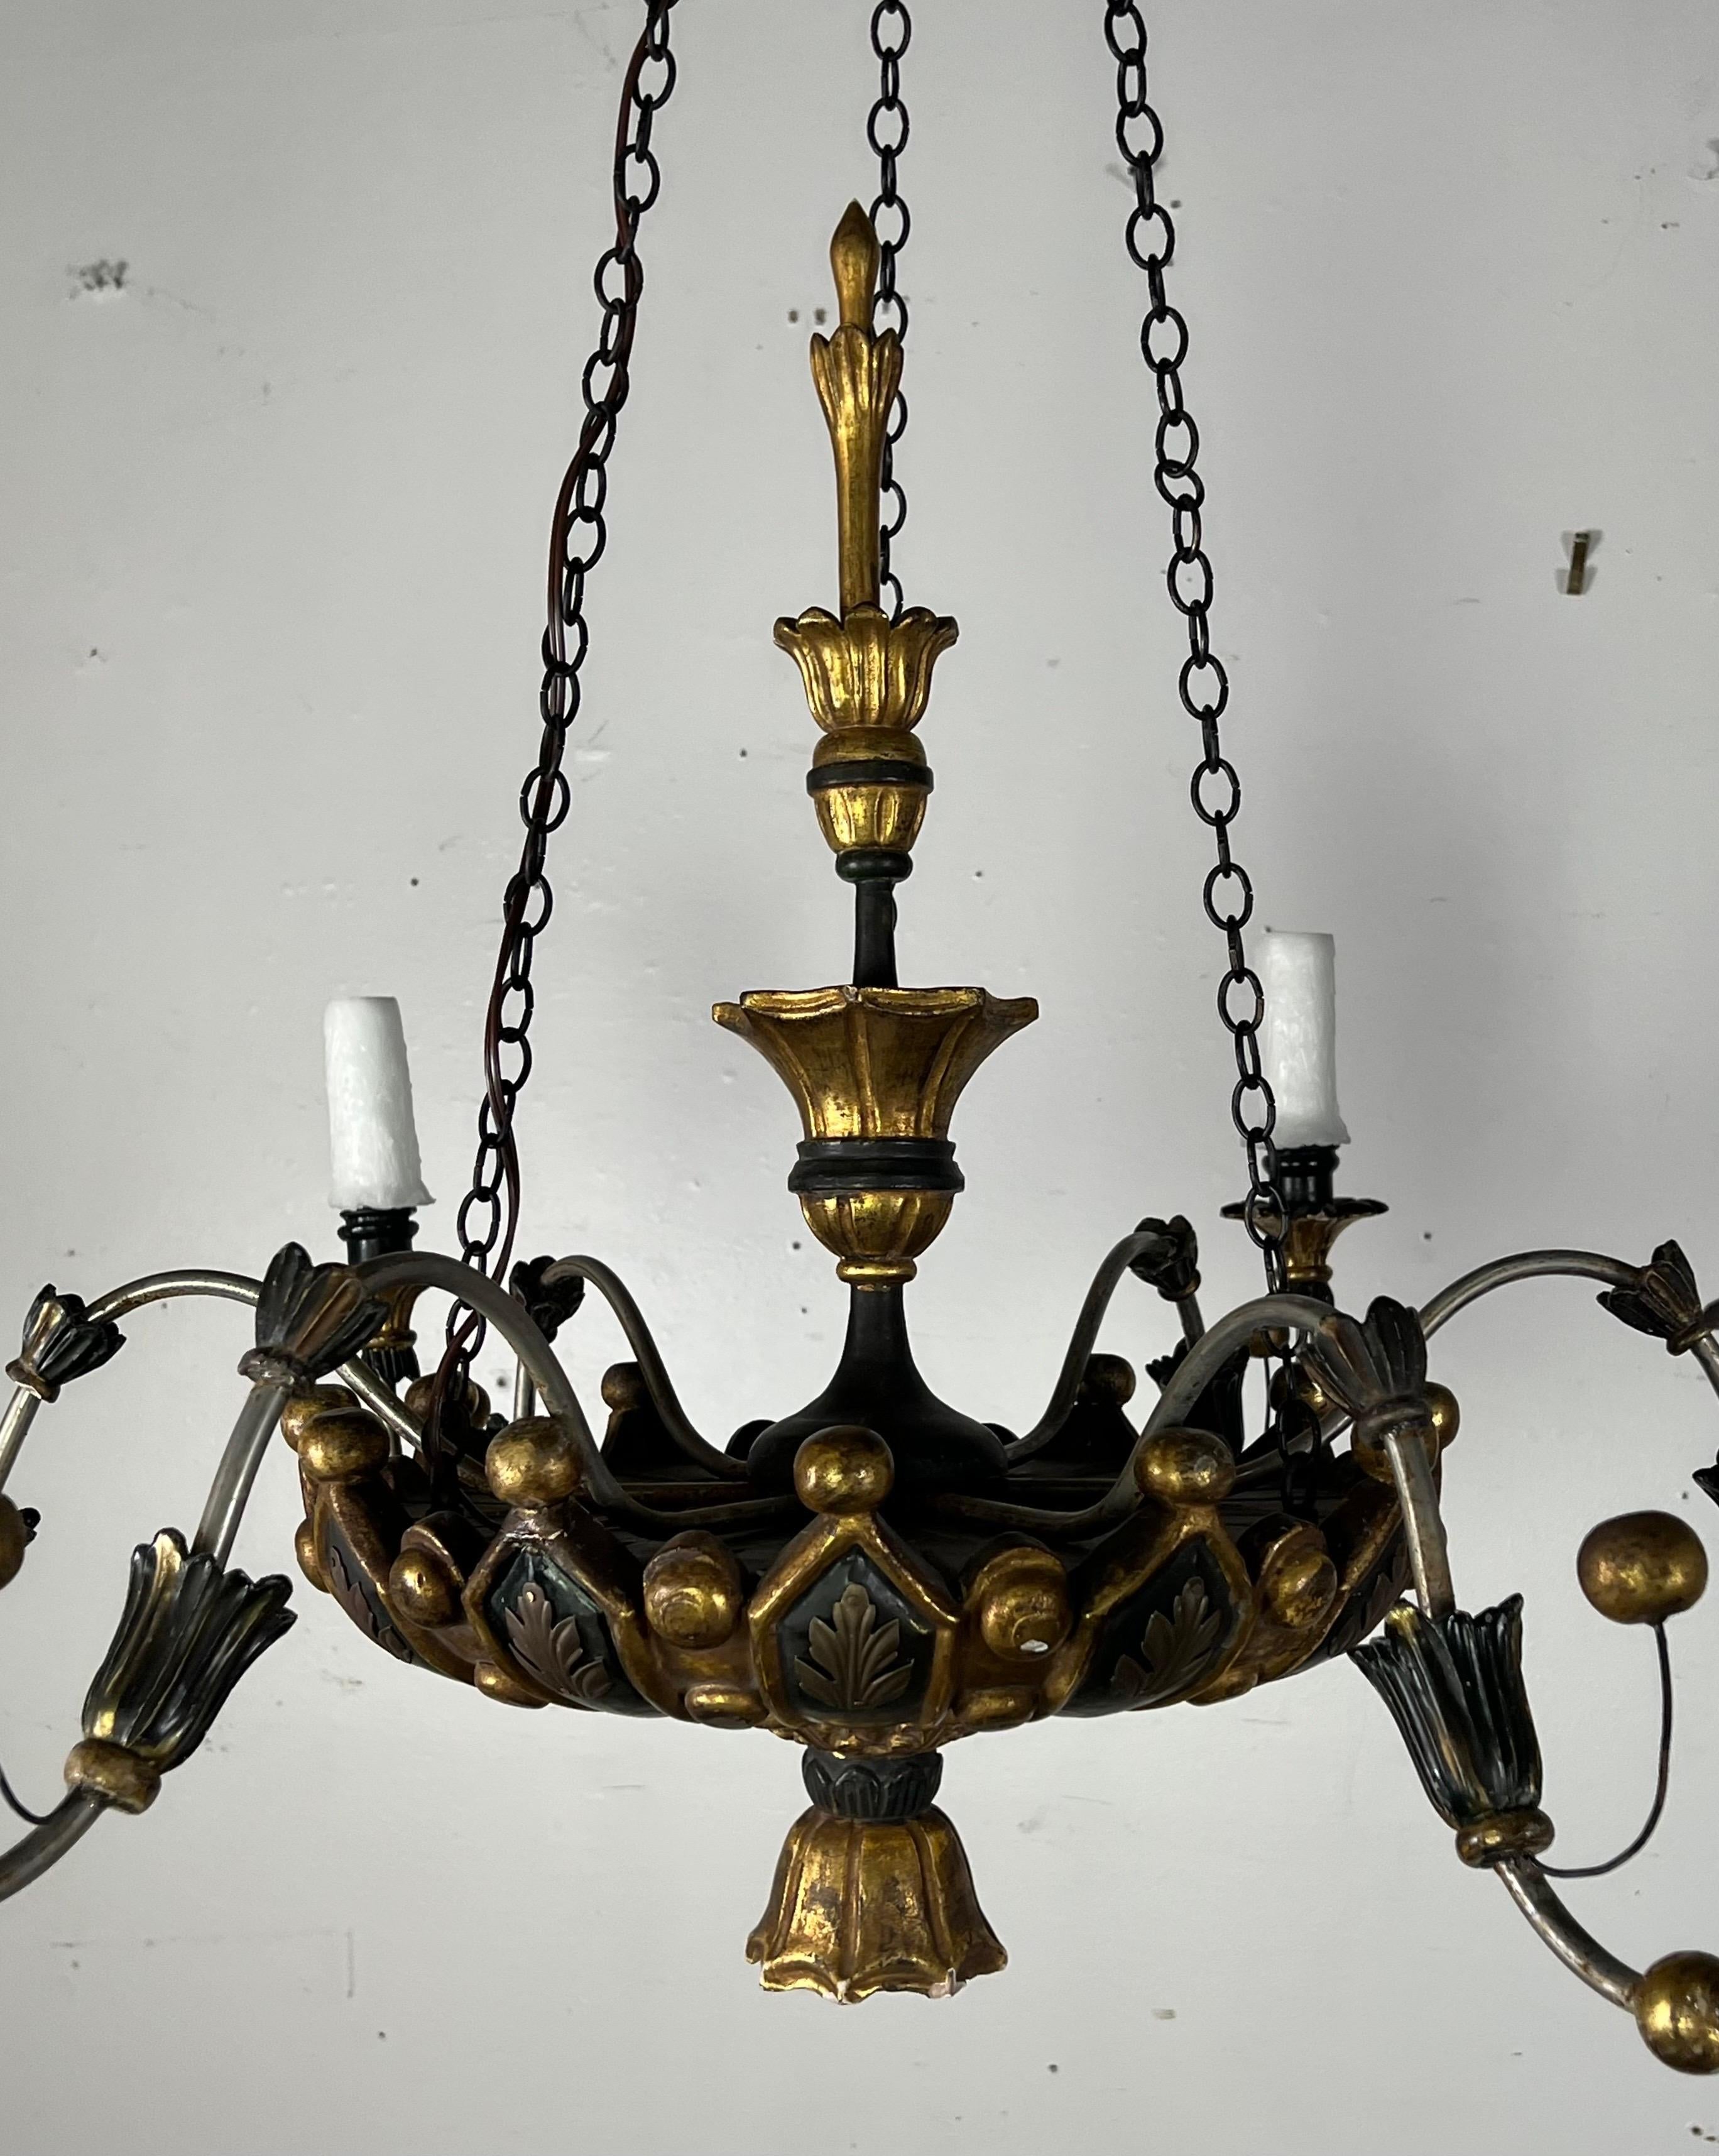 A six-light Regency style chandelier featuring intricate carved and painted details, blending historical aesthetics with modern functionality.  The Regency style, know for its elegant and refined decoration, often includes motifs such as acanthus